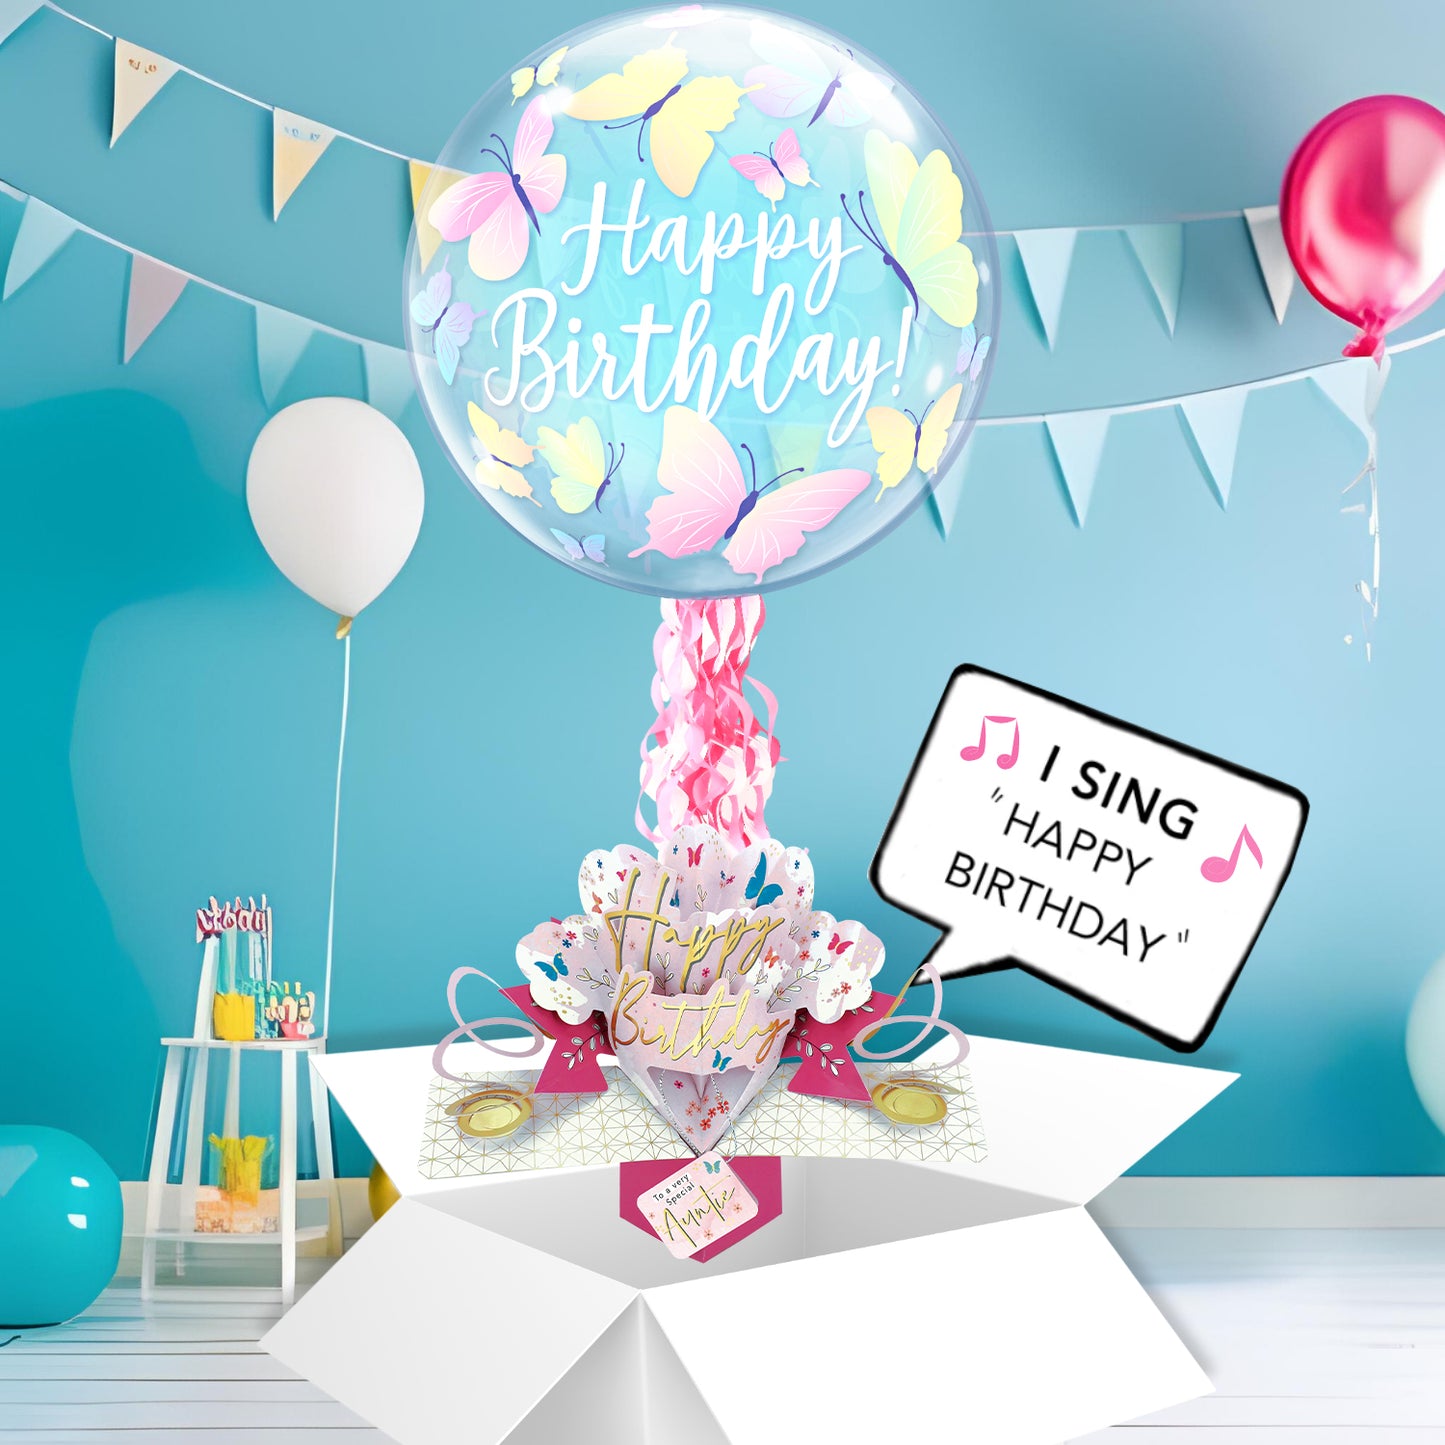 Auntie Birthday Pop Up Card & Musical Balloon Surprise Delivered In A Box